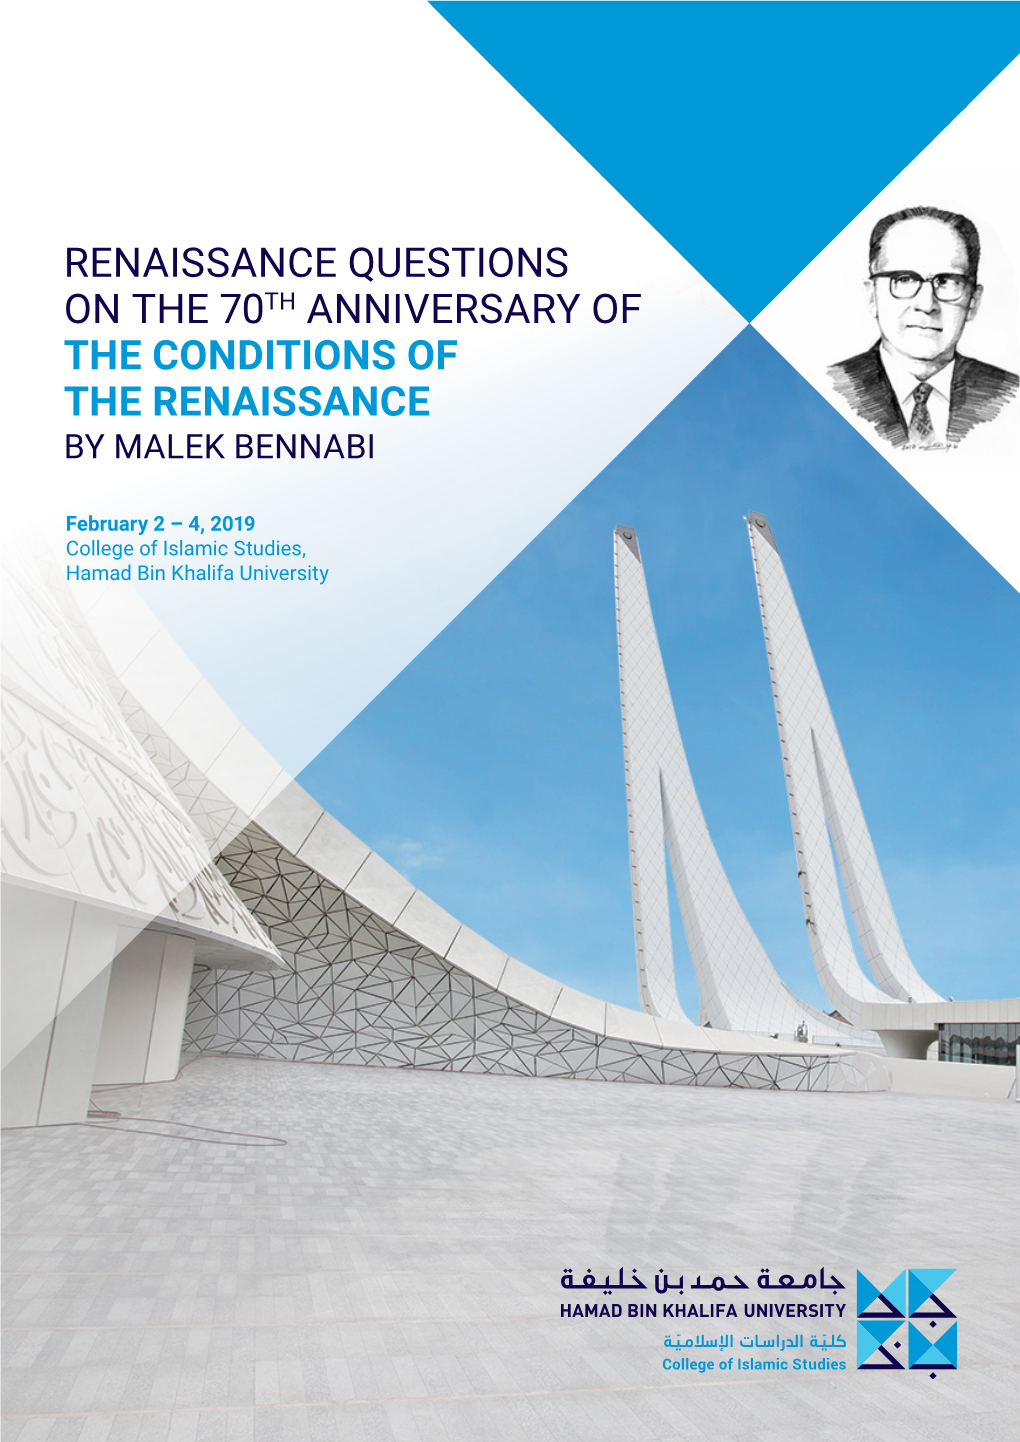 Renaissance Questions on the 70Th Anniversary of the Conditions of the Renaissance by Malek Bennabi